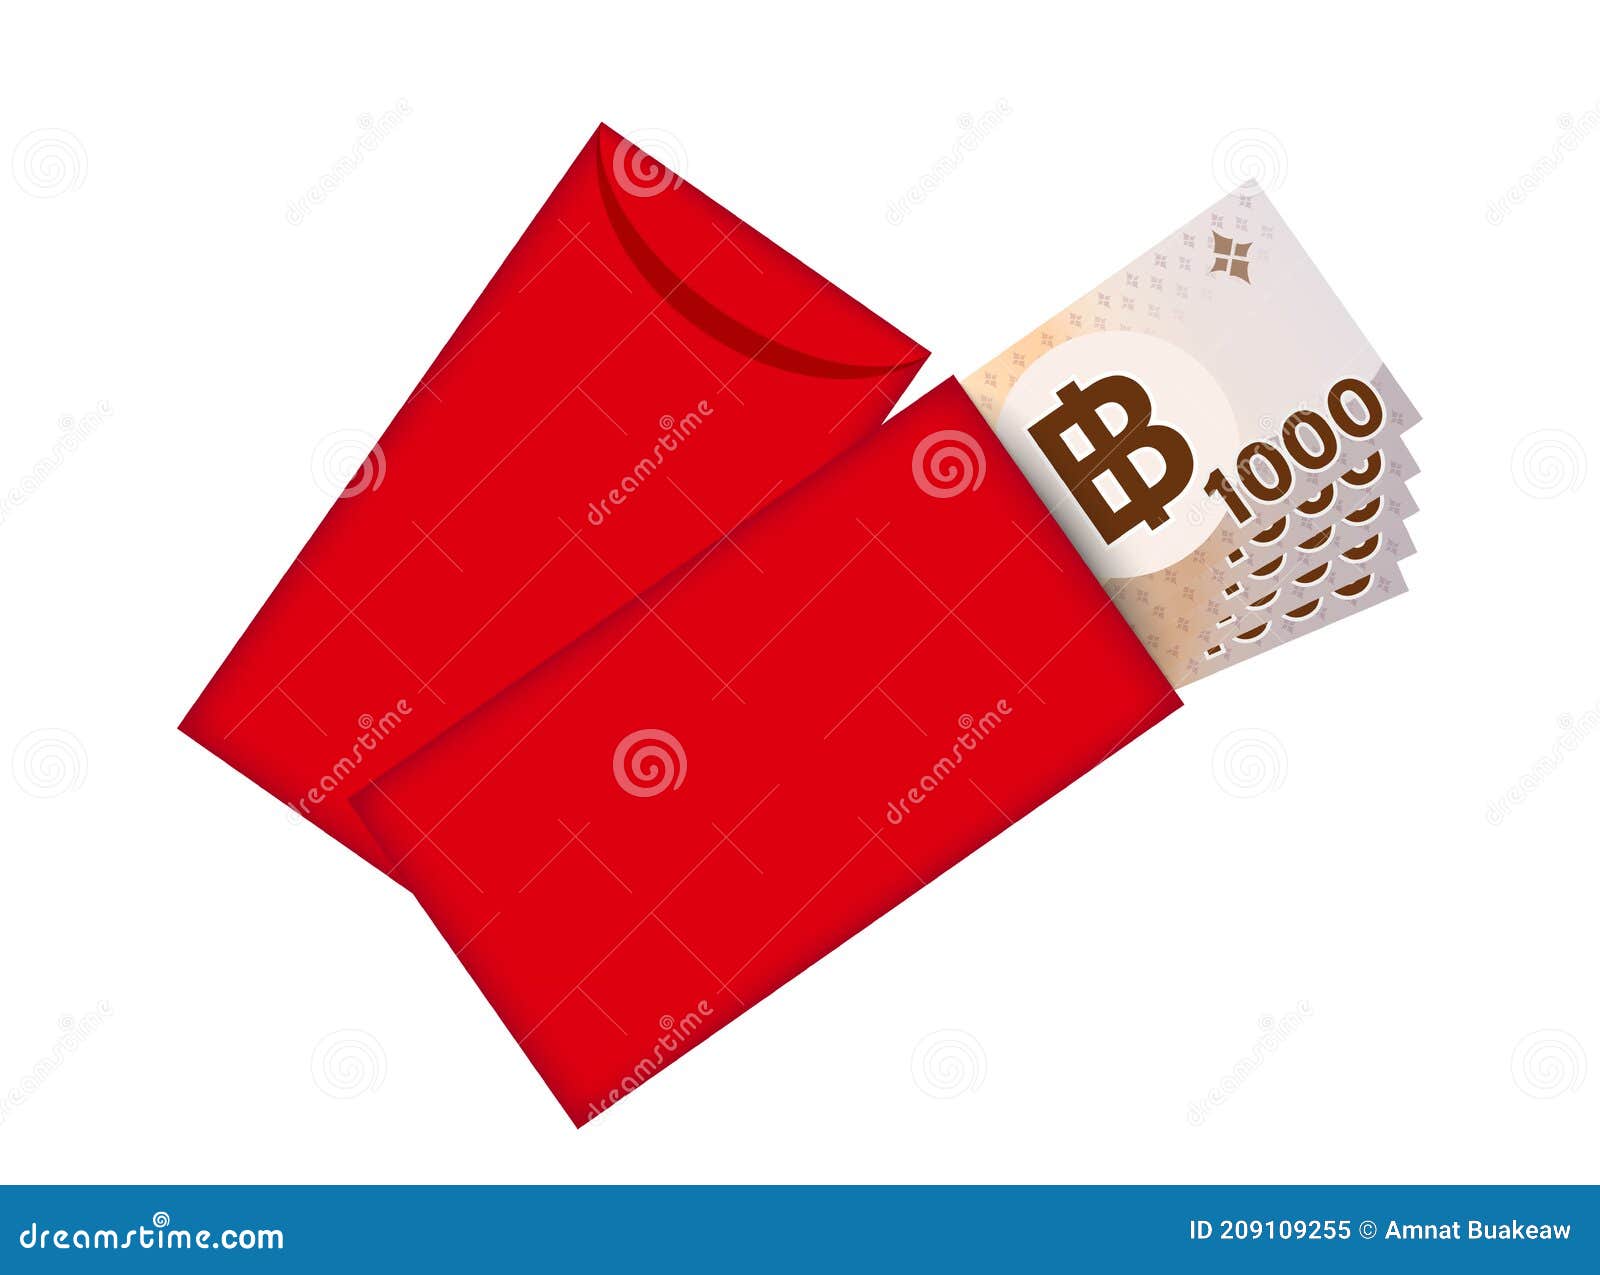 Red Packet and Money Banknote Thai Baht Red Envelope for New Year China Chinese  Red Envelope Stock Vector - Illustration of envelope, card: 209109255